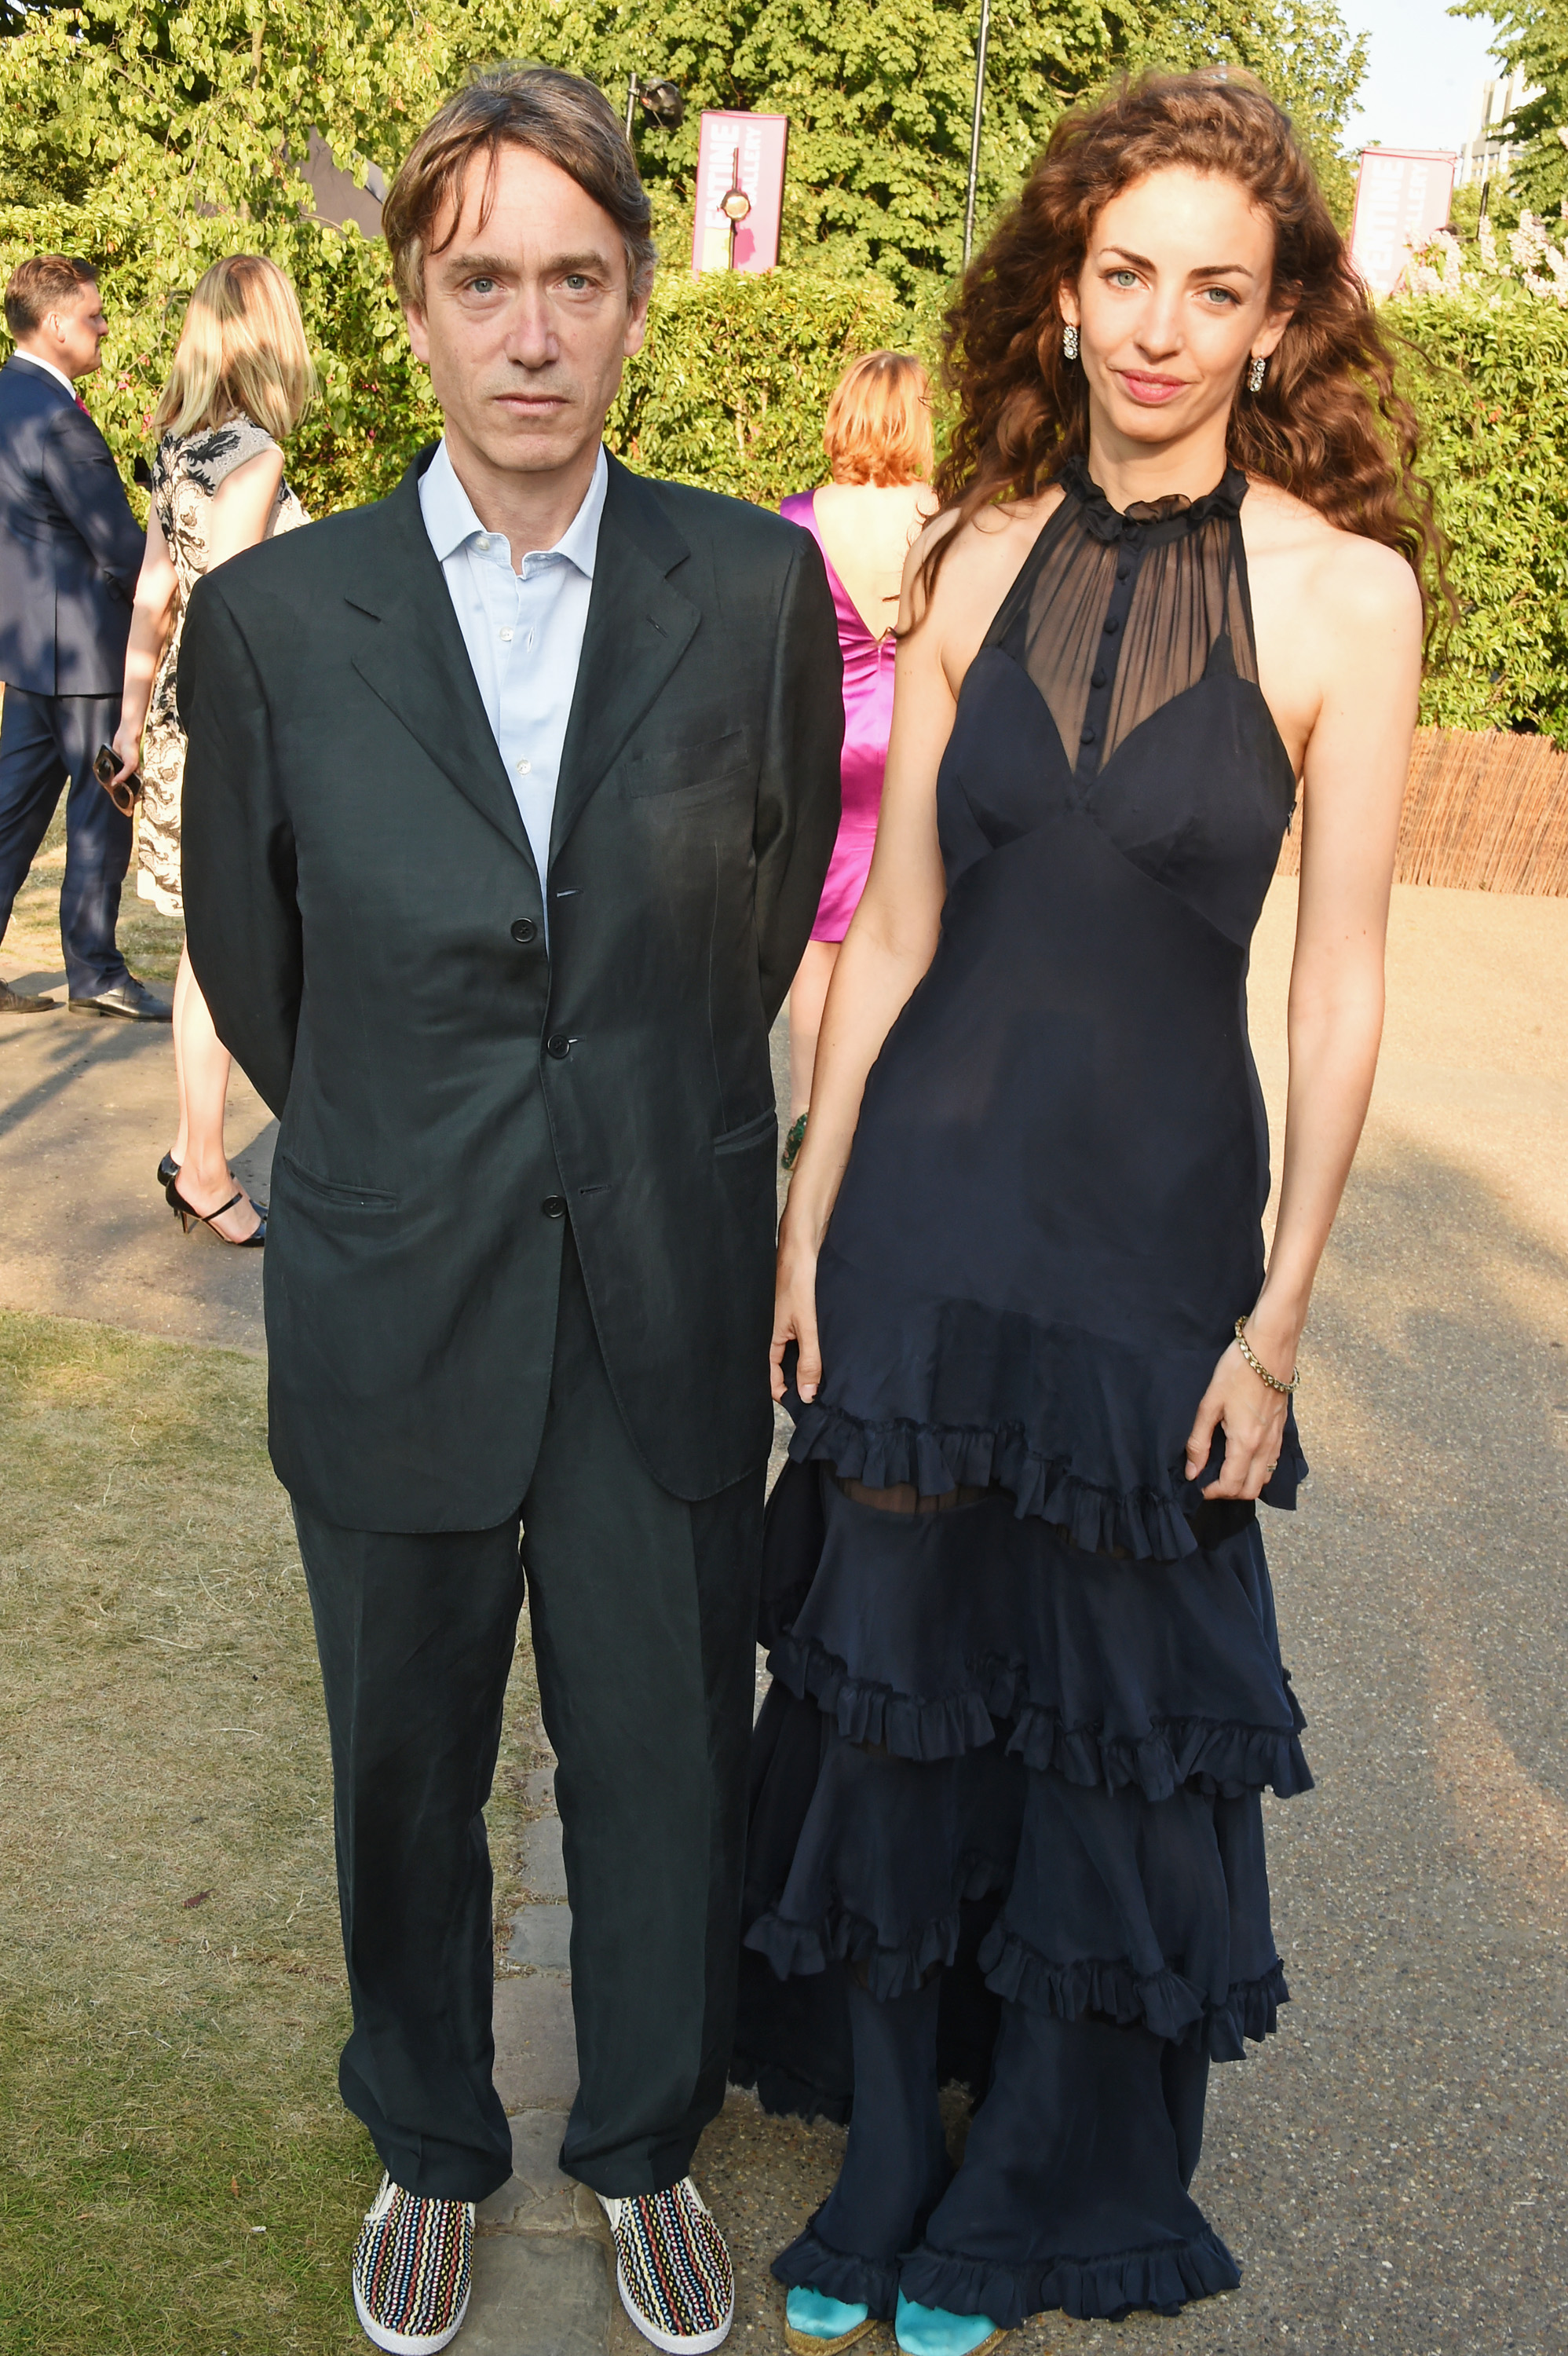 David Rocksavage, the Marquess of Cholmondeley and Lady Rose Hanbury at the The Serpentine Gallery summer party in London, England on July 2, 2015 | Source: Getty Images